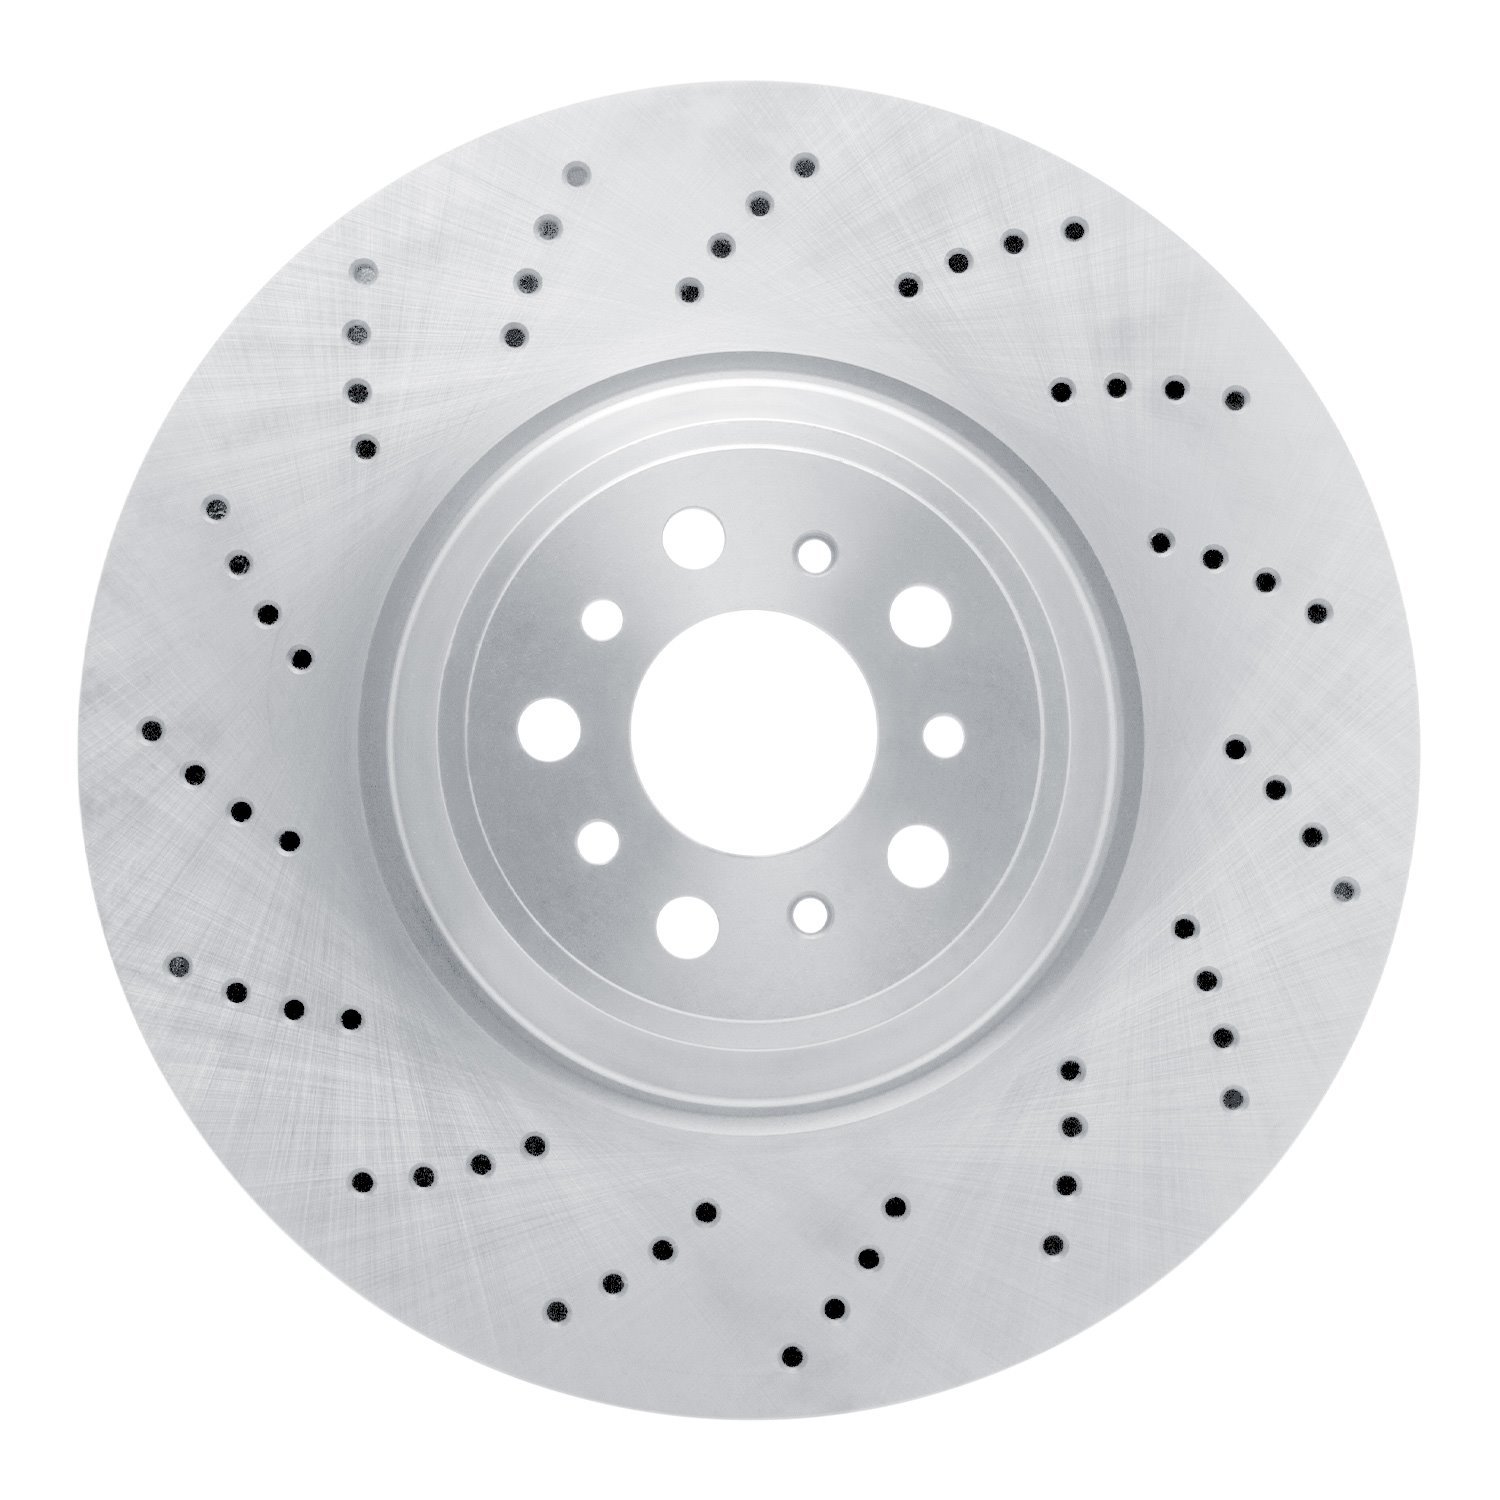 E-Line Drilled Brake Rotor, Fits Select BMW, Position: Left Front